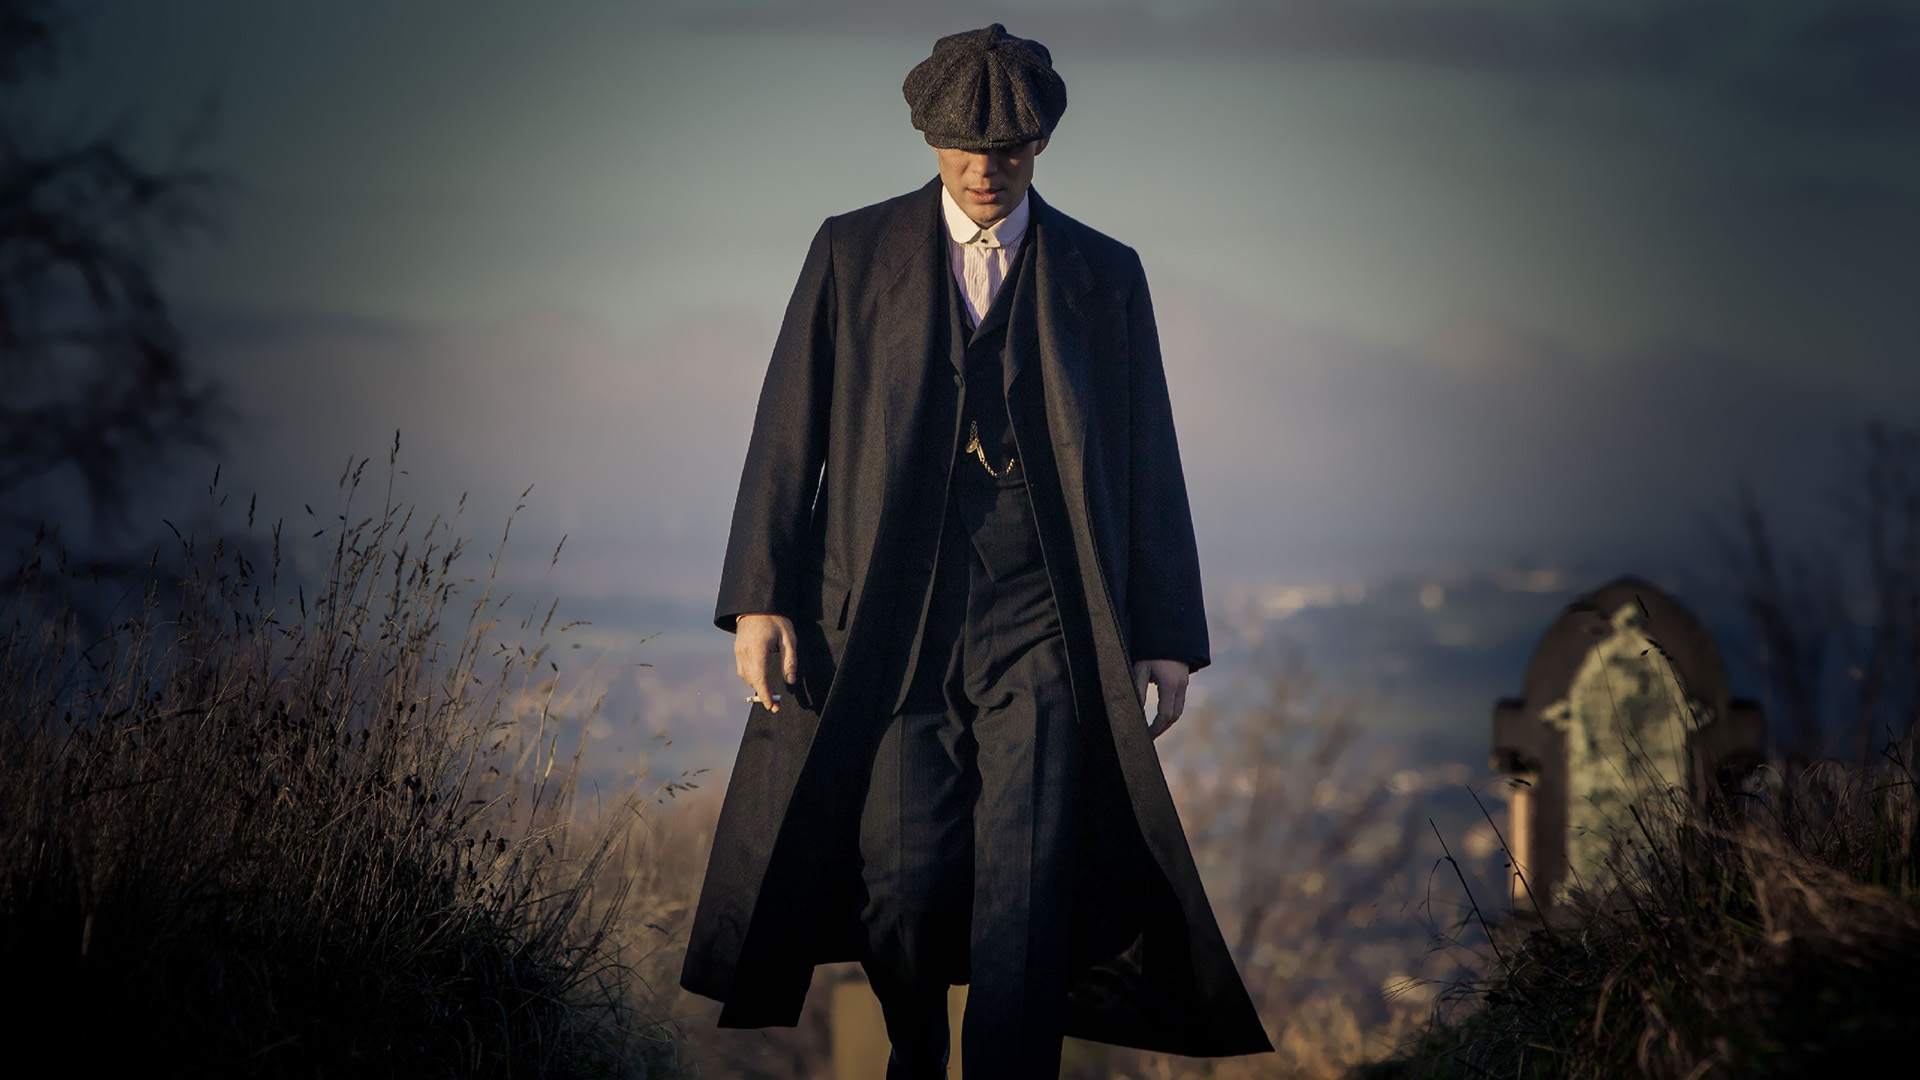 Cool Peaky Blinders Backgrounds